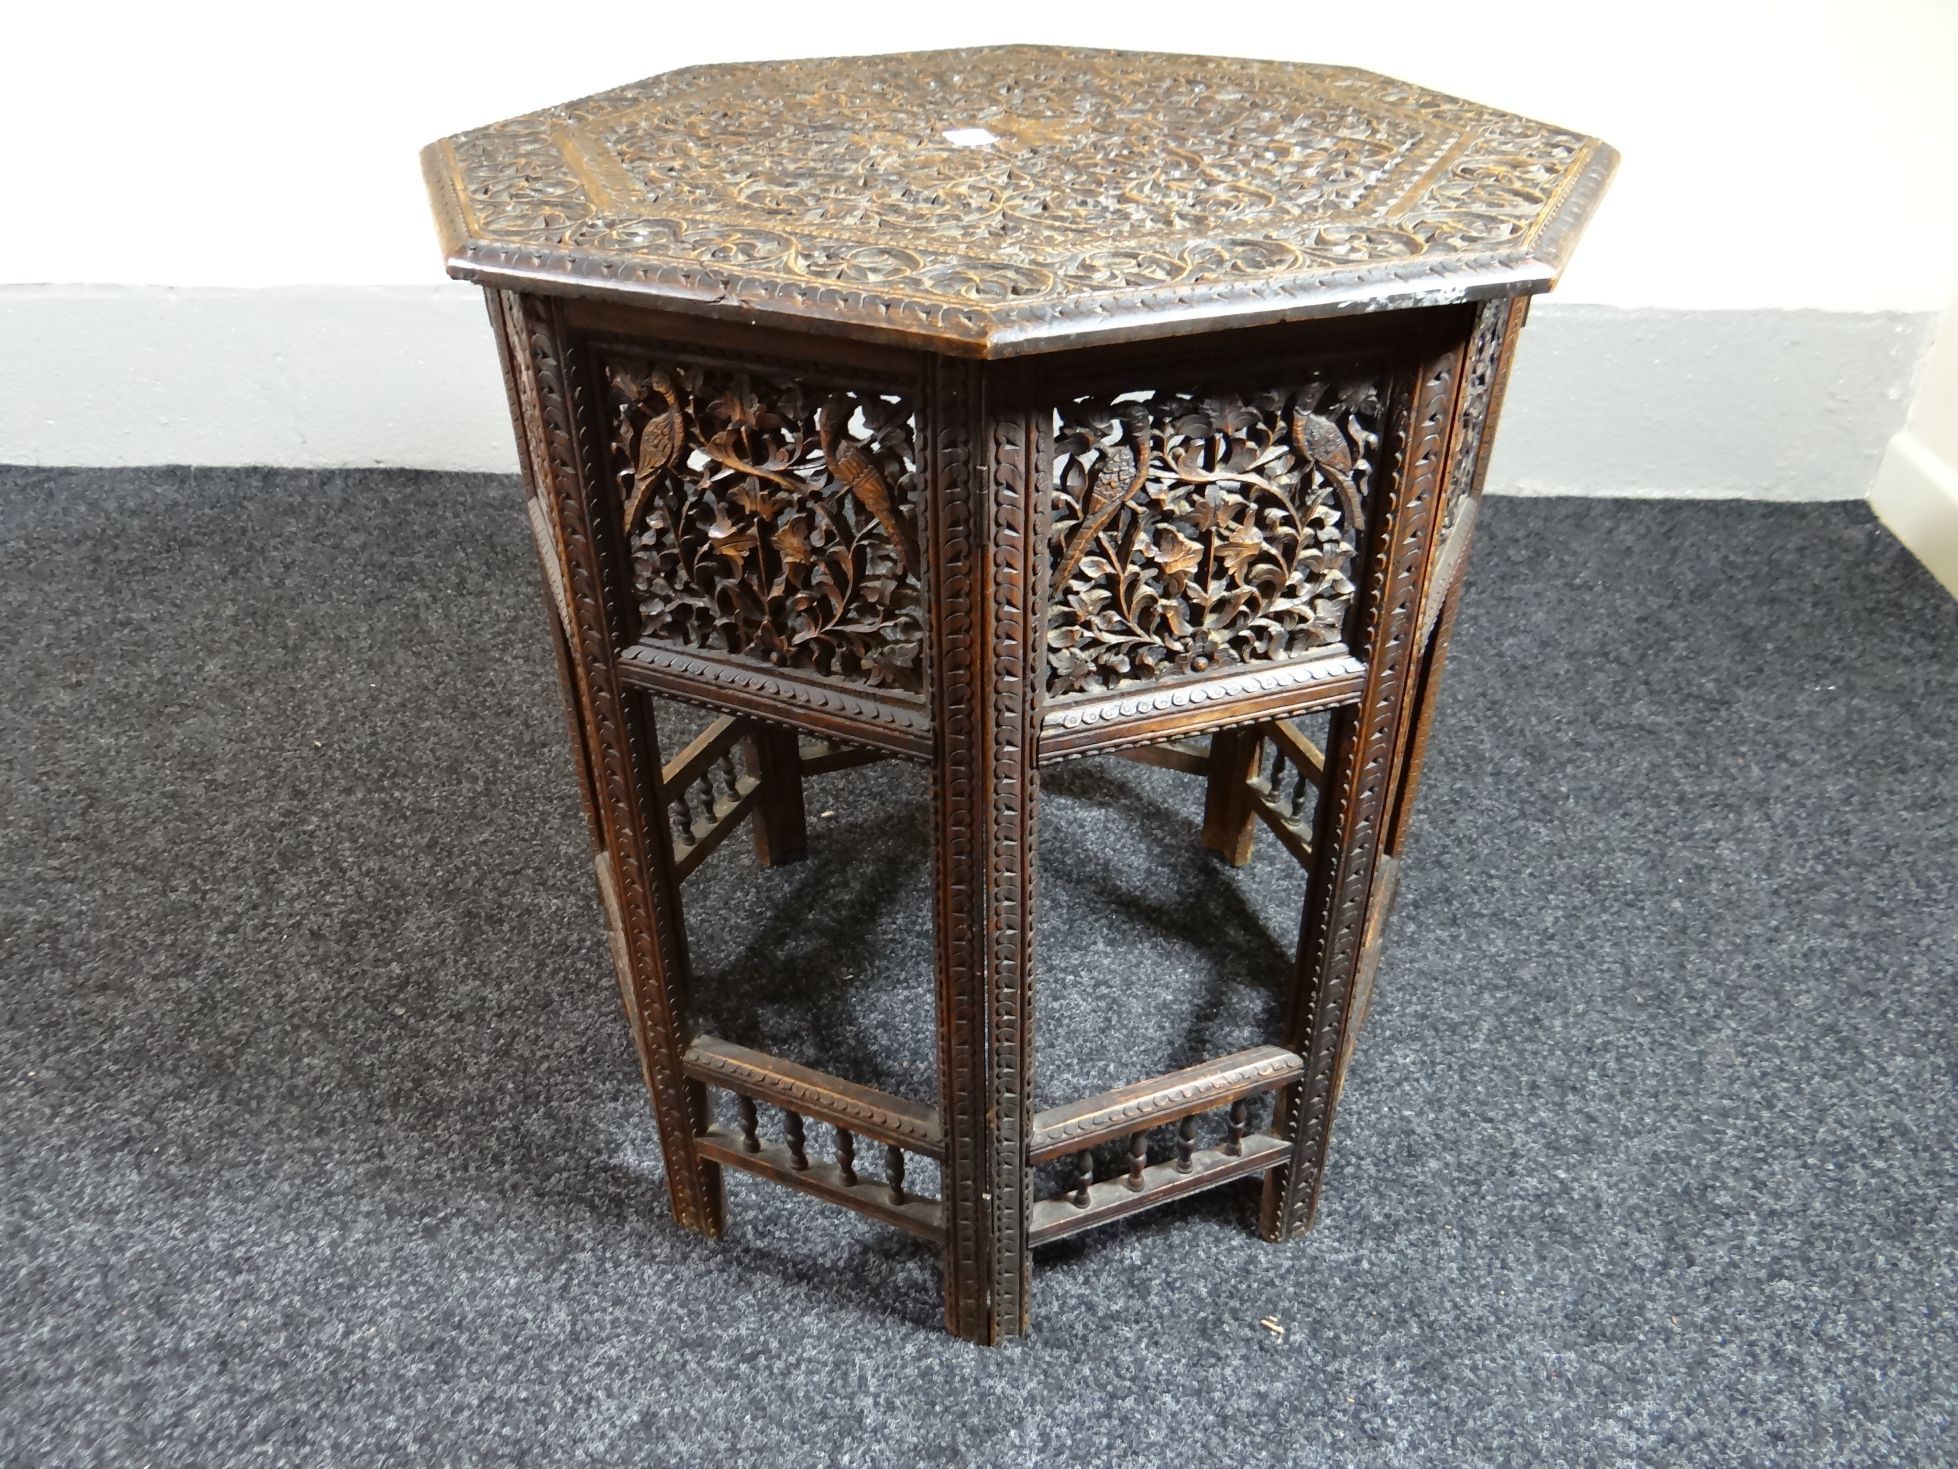 An Indian octagonal carved and pierce-work table, the top profusely carved with foliage and the